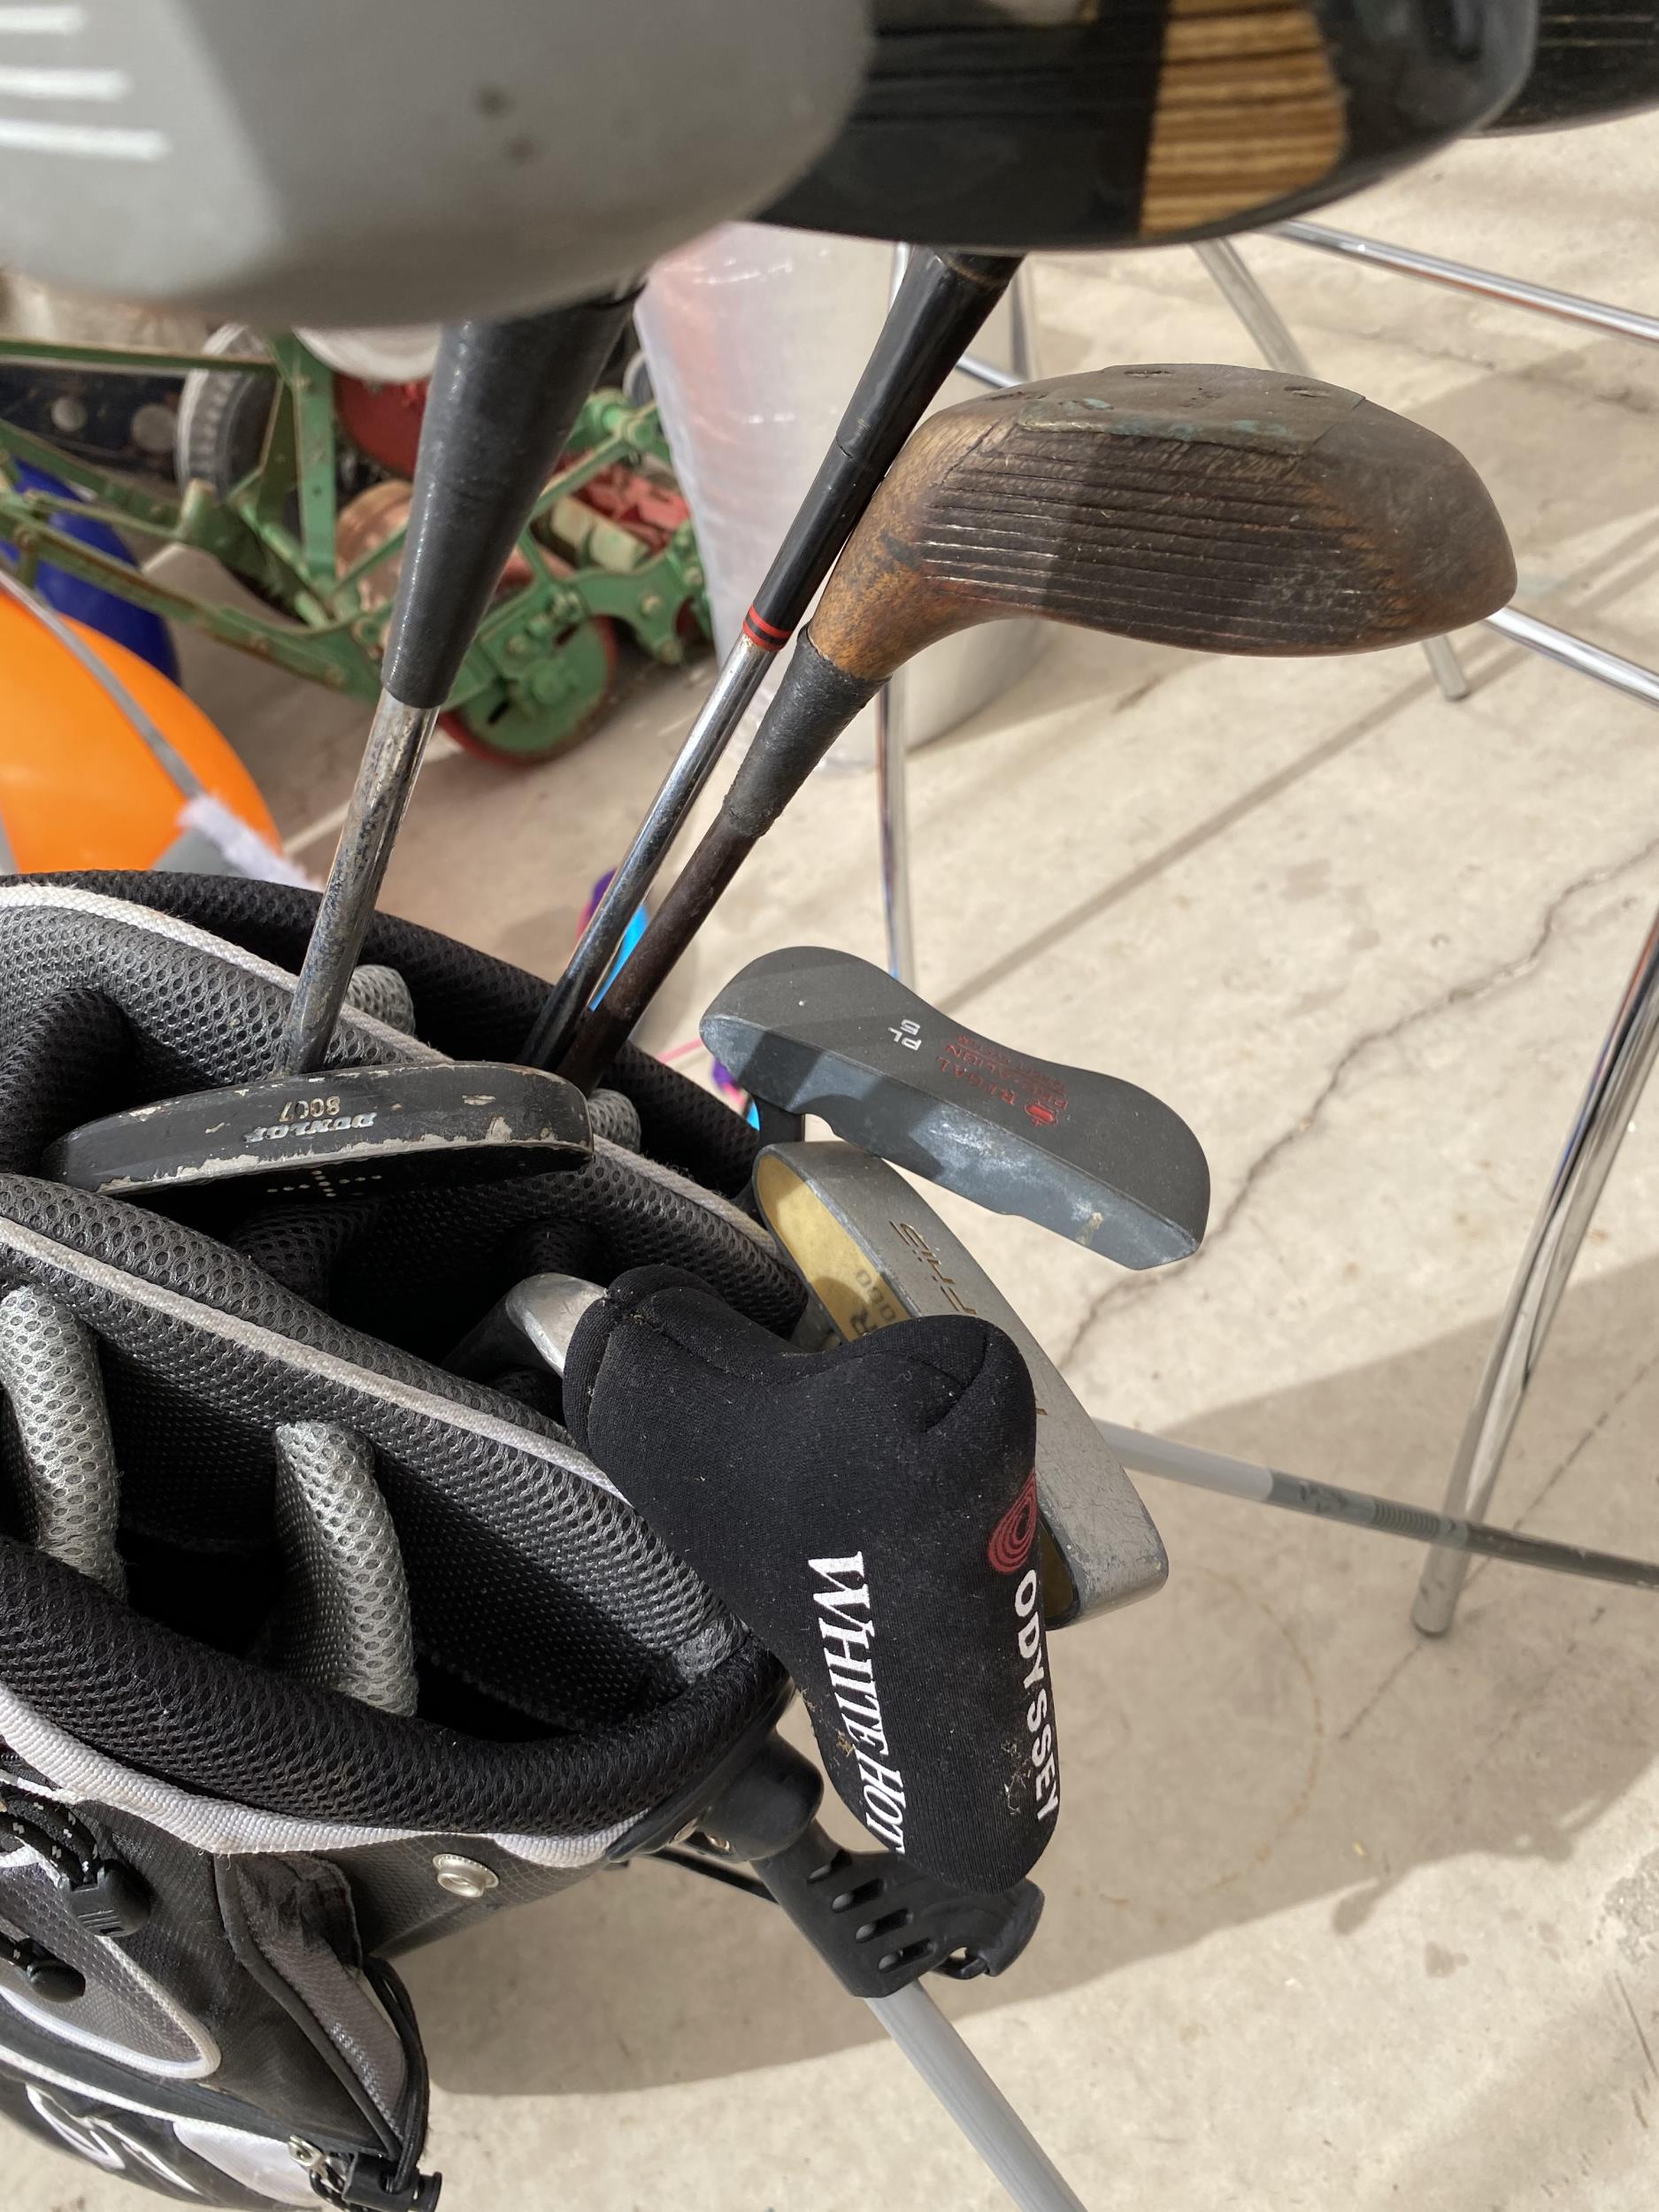 A CALLAWAY GOLF BAG WITH EIGHT VARIOUS GOLF CLUBS - Image 4 of 4